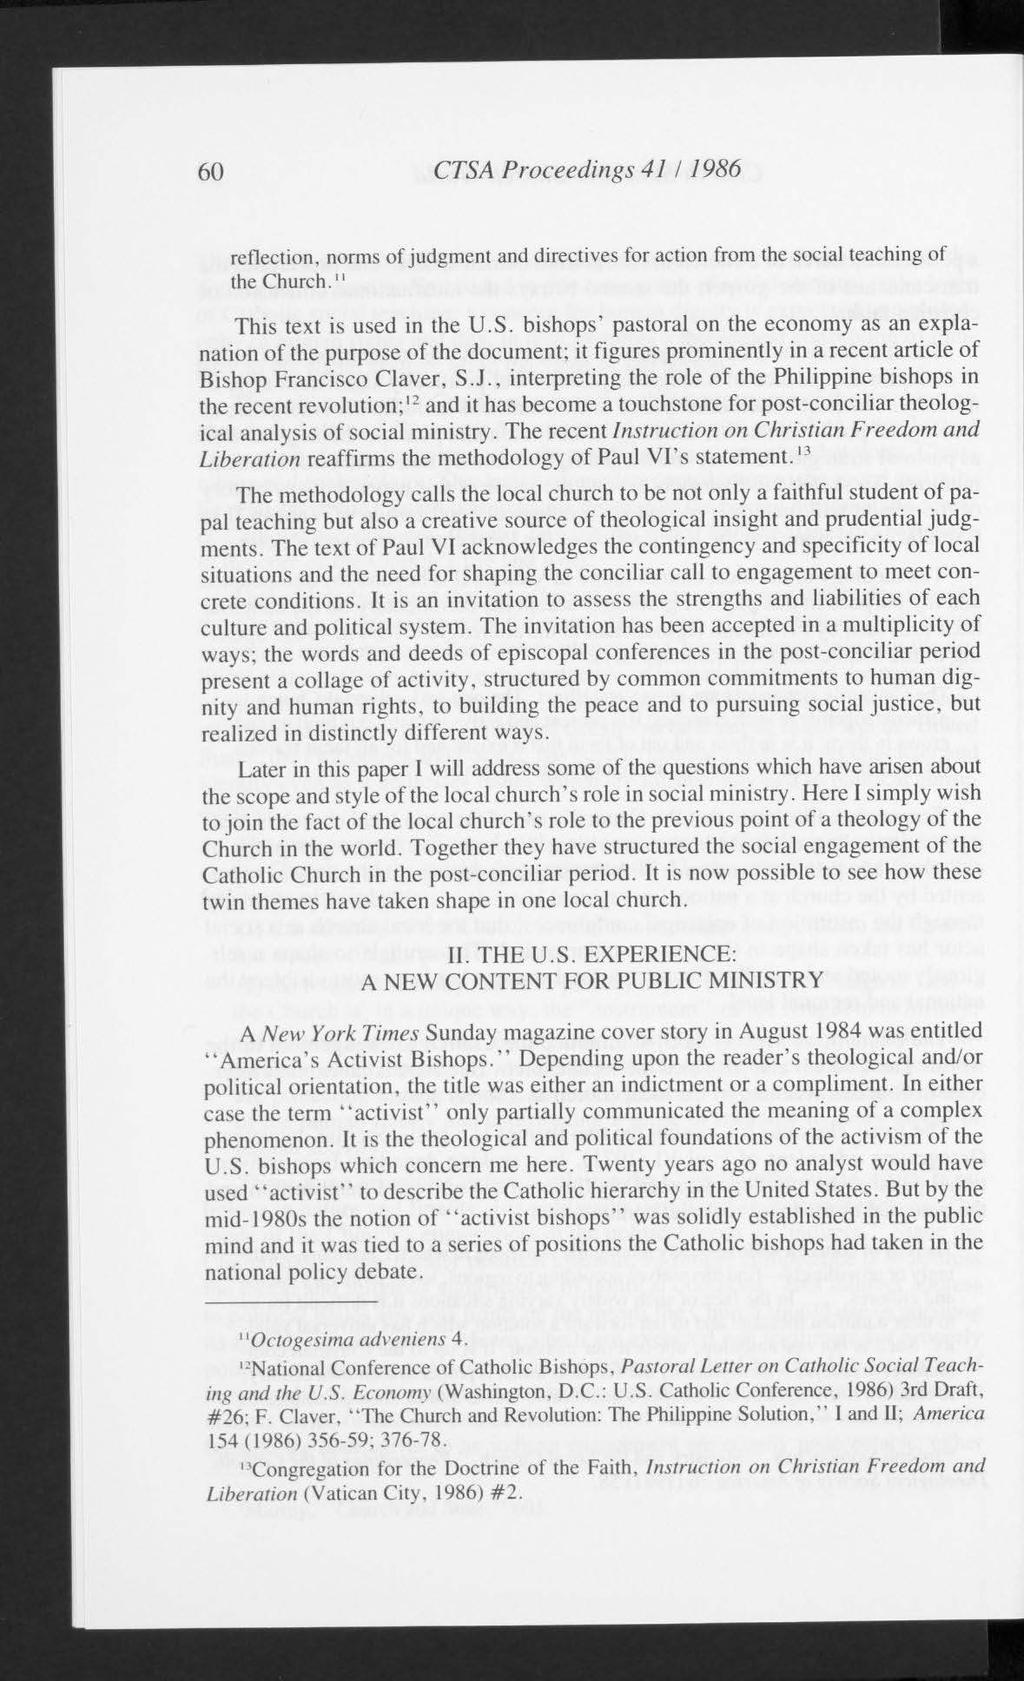 60 CTS A Proceedings 41 / 1986 reflection, norms of judgment and directives for action from the social teaching of the Church." This text is used in the U.S. bishops' pastoral on the economy as an explanation of the purpose of the document; it figures prominently in a recent article of Bishop Francisco Claver, S.